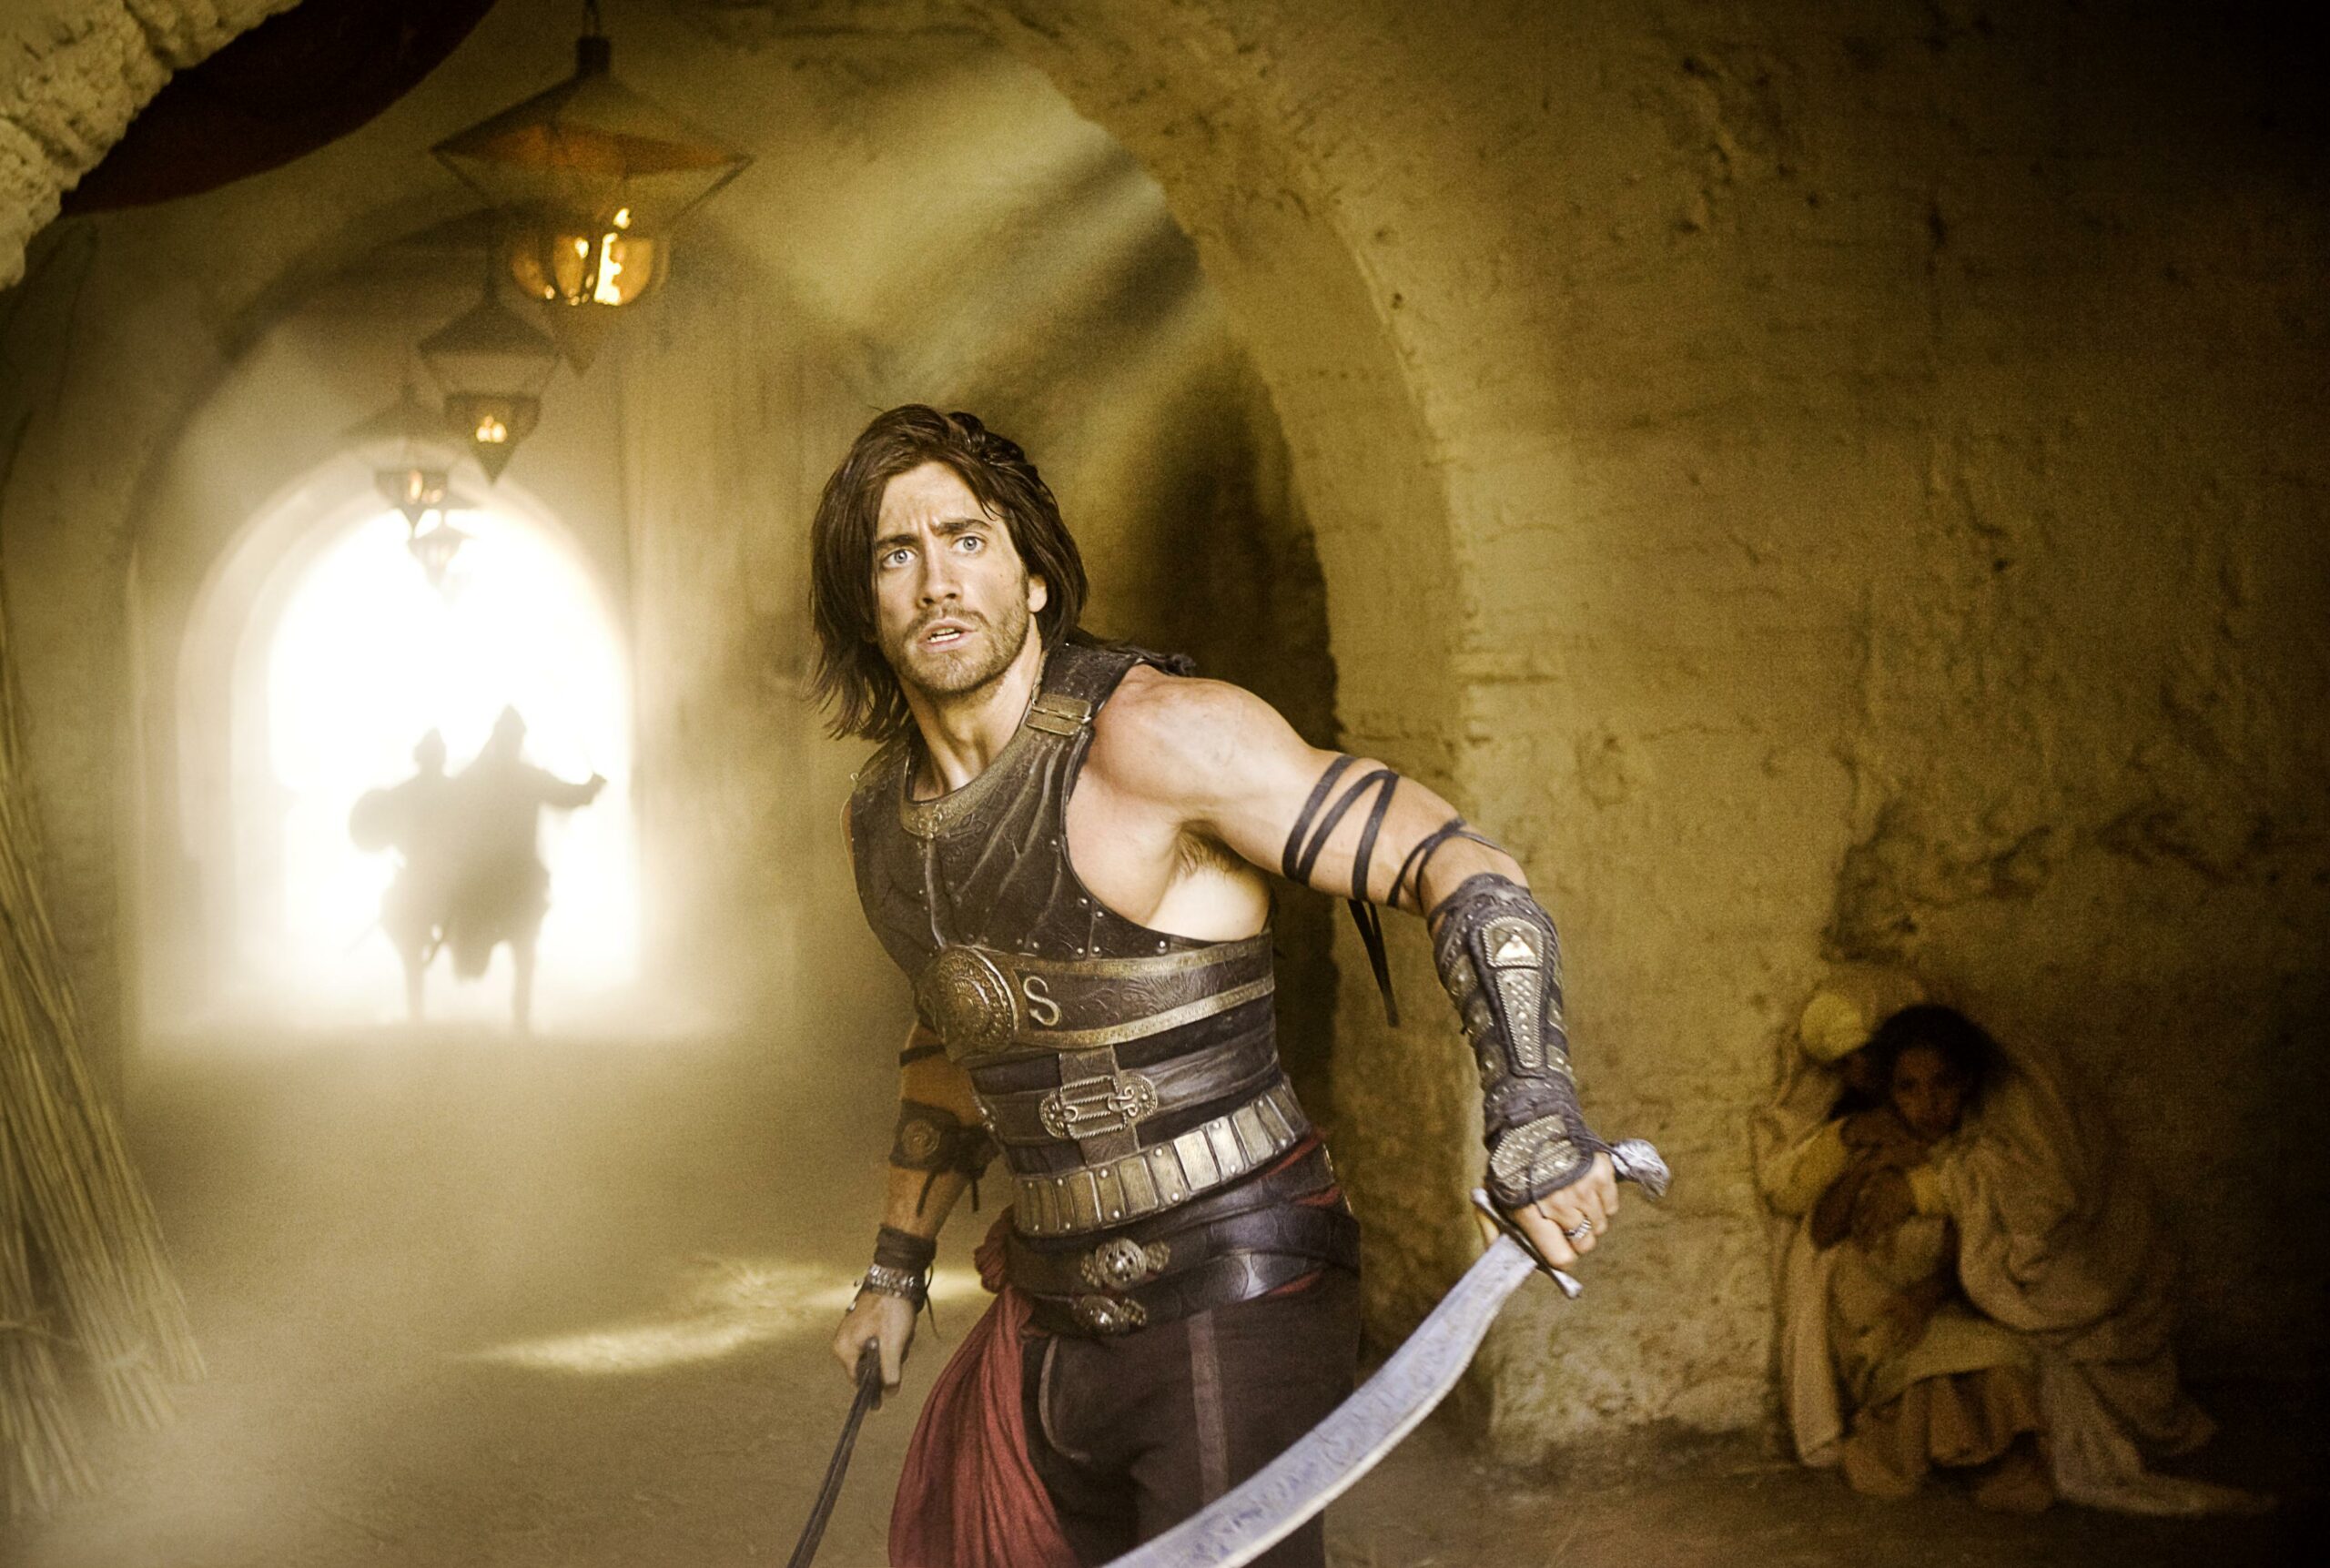 PRINCE OF PERSIA - Directed by Mike Newel - Ext. Alamut City - ©2010 - Walt Disney Pictures